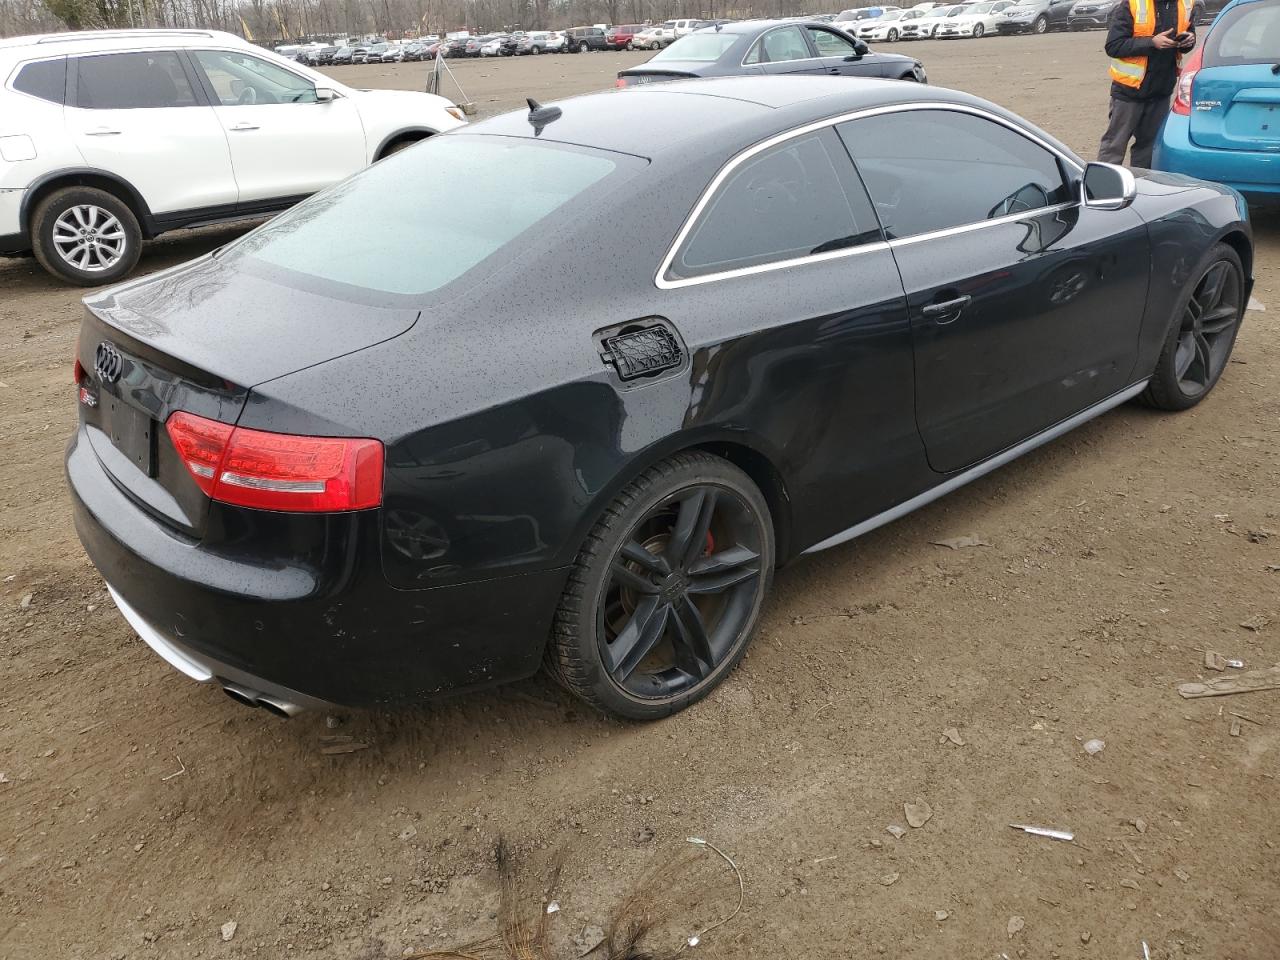 VIN: WAUVVAFR1AA052071 AUDI RS5 2010